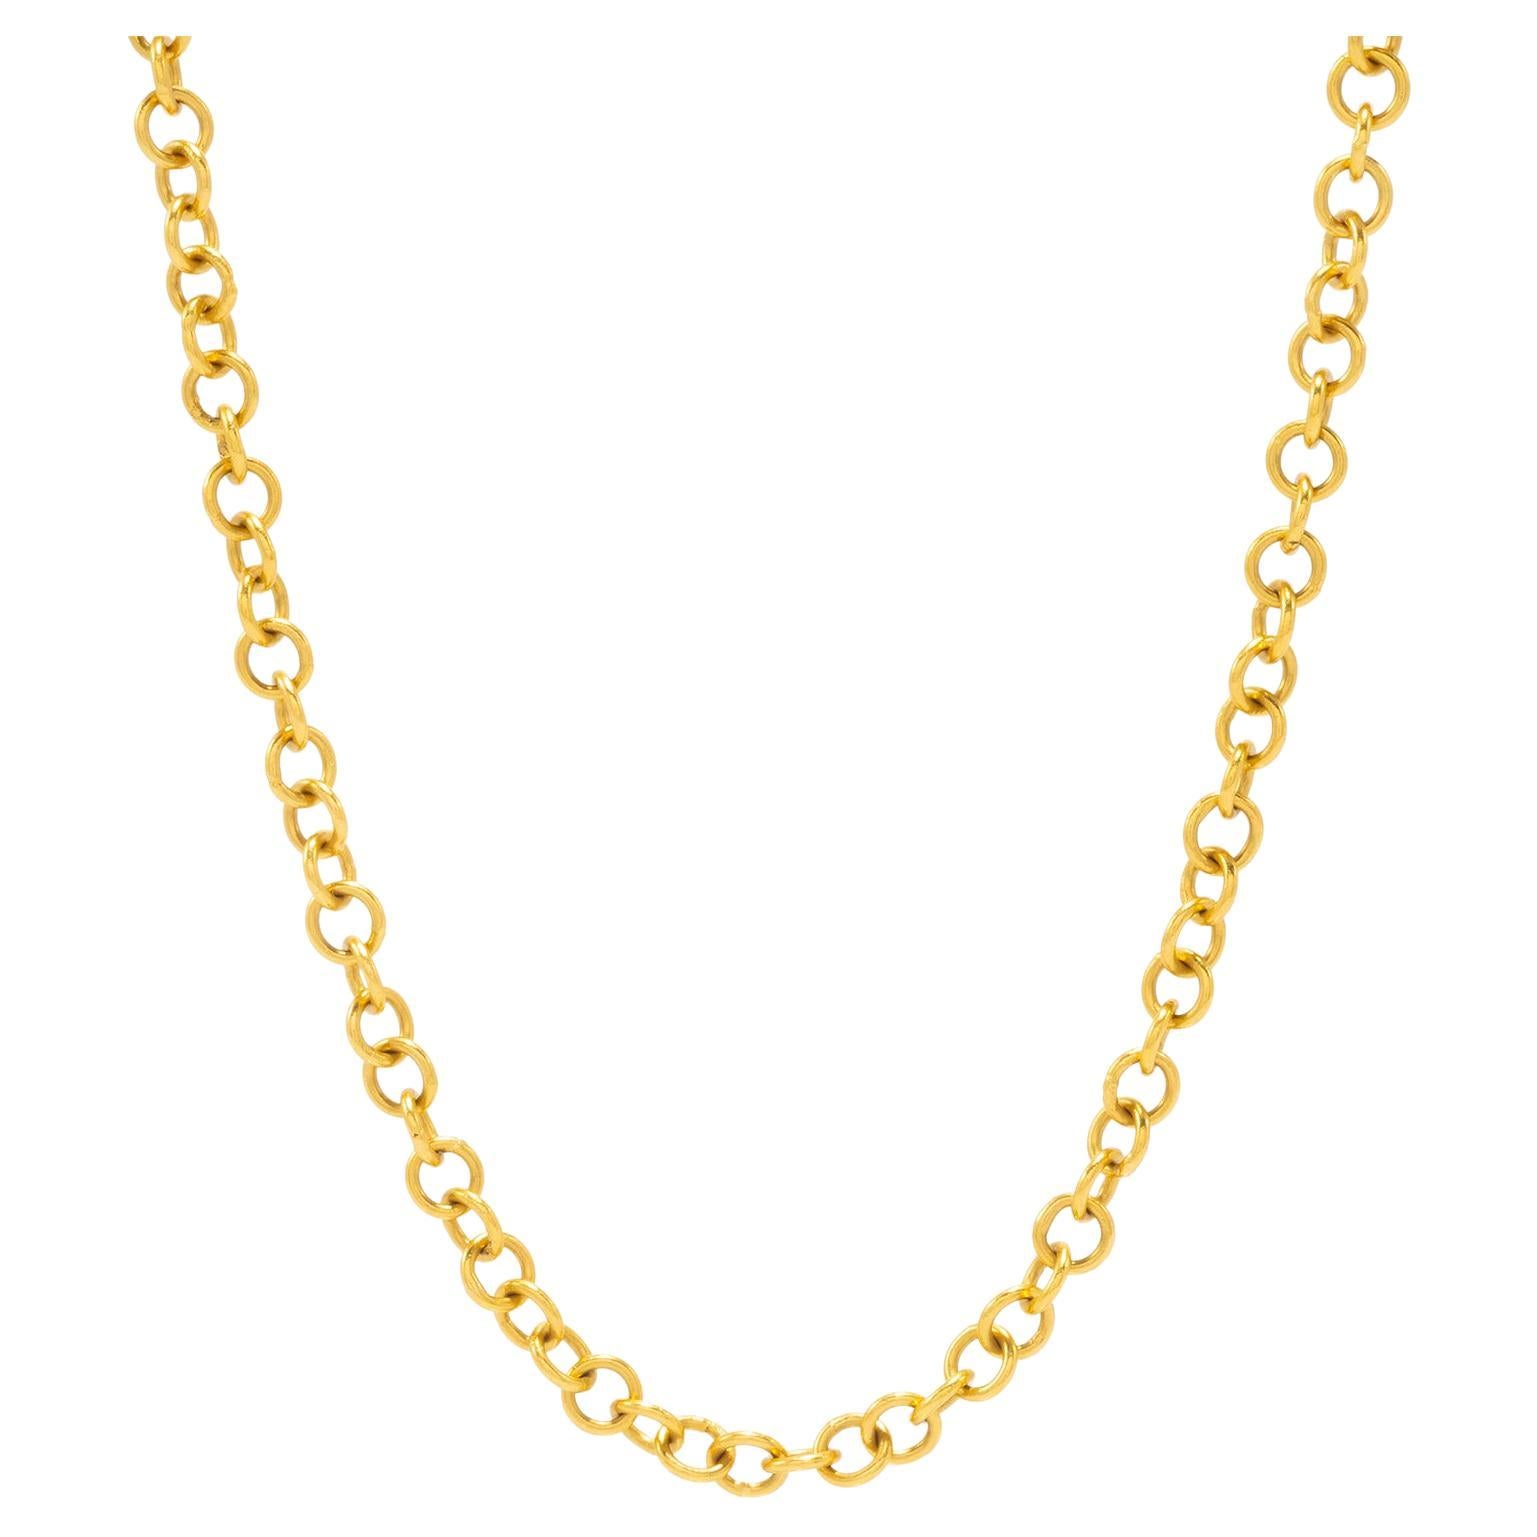 16" 20k Gold Handmade Thick Chain Necklace For Sale